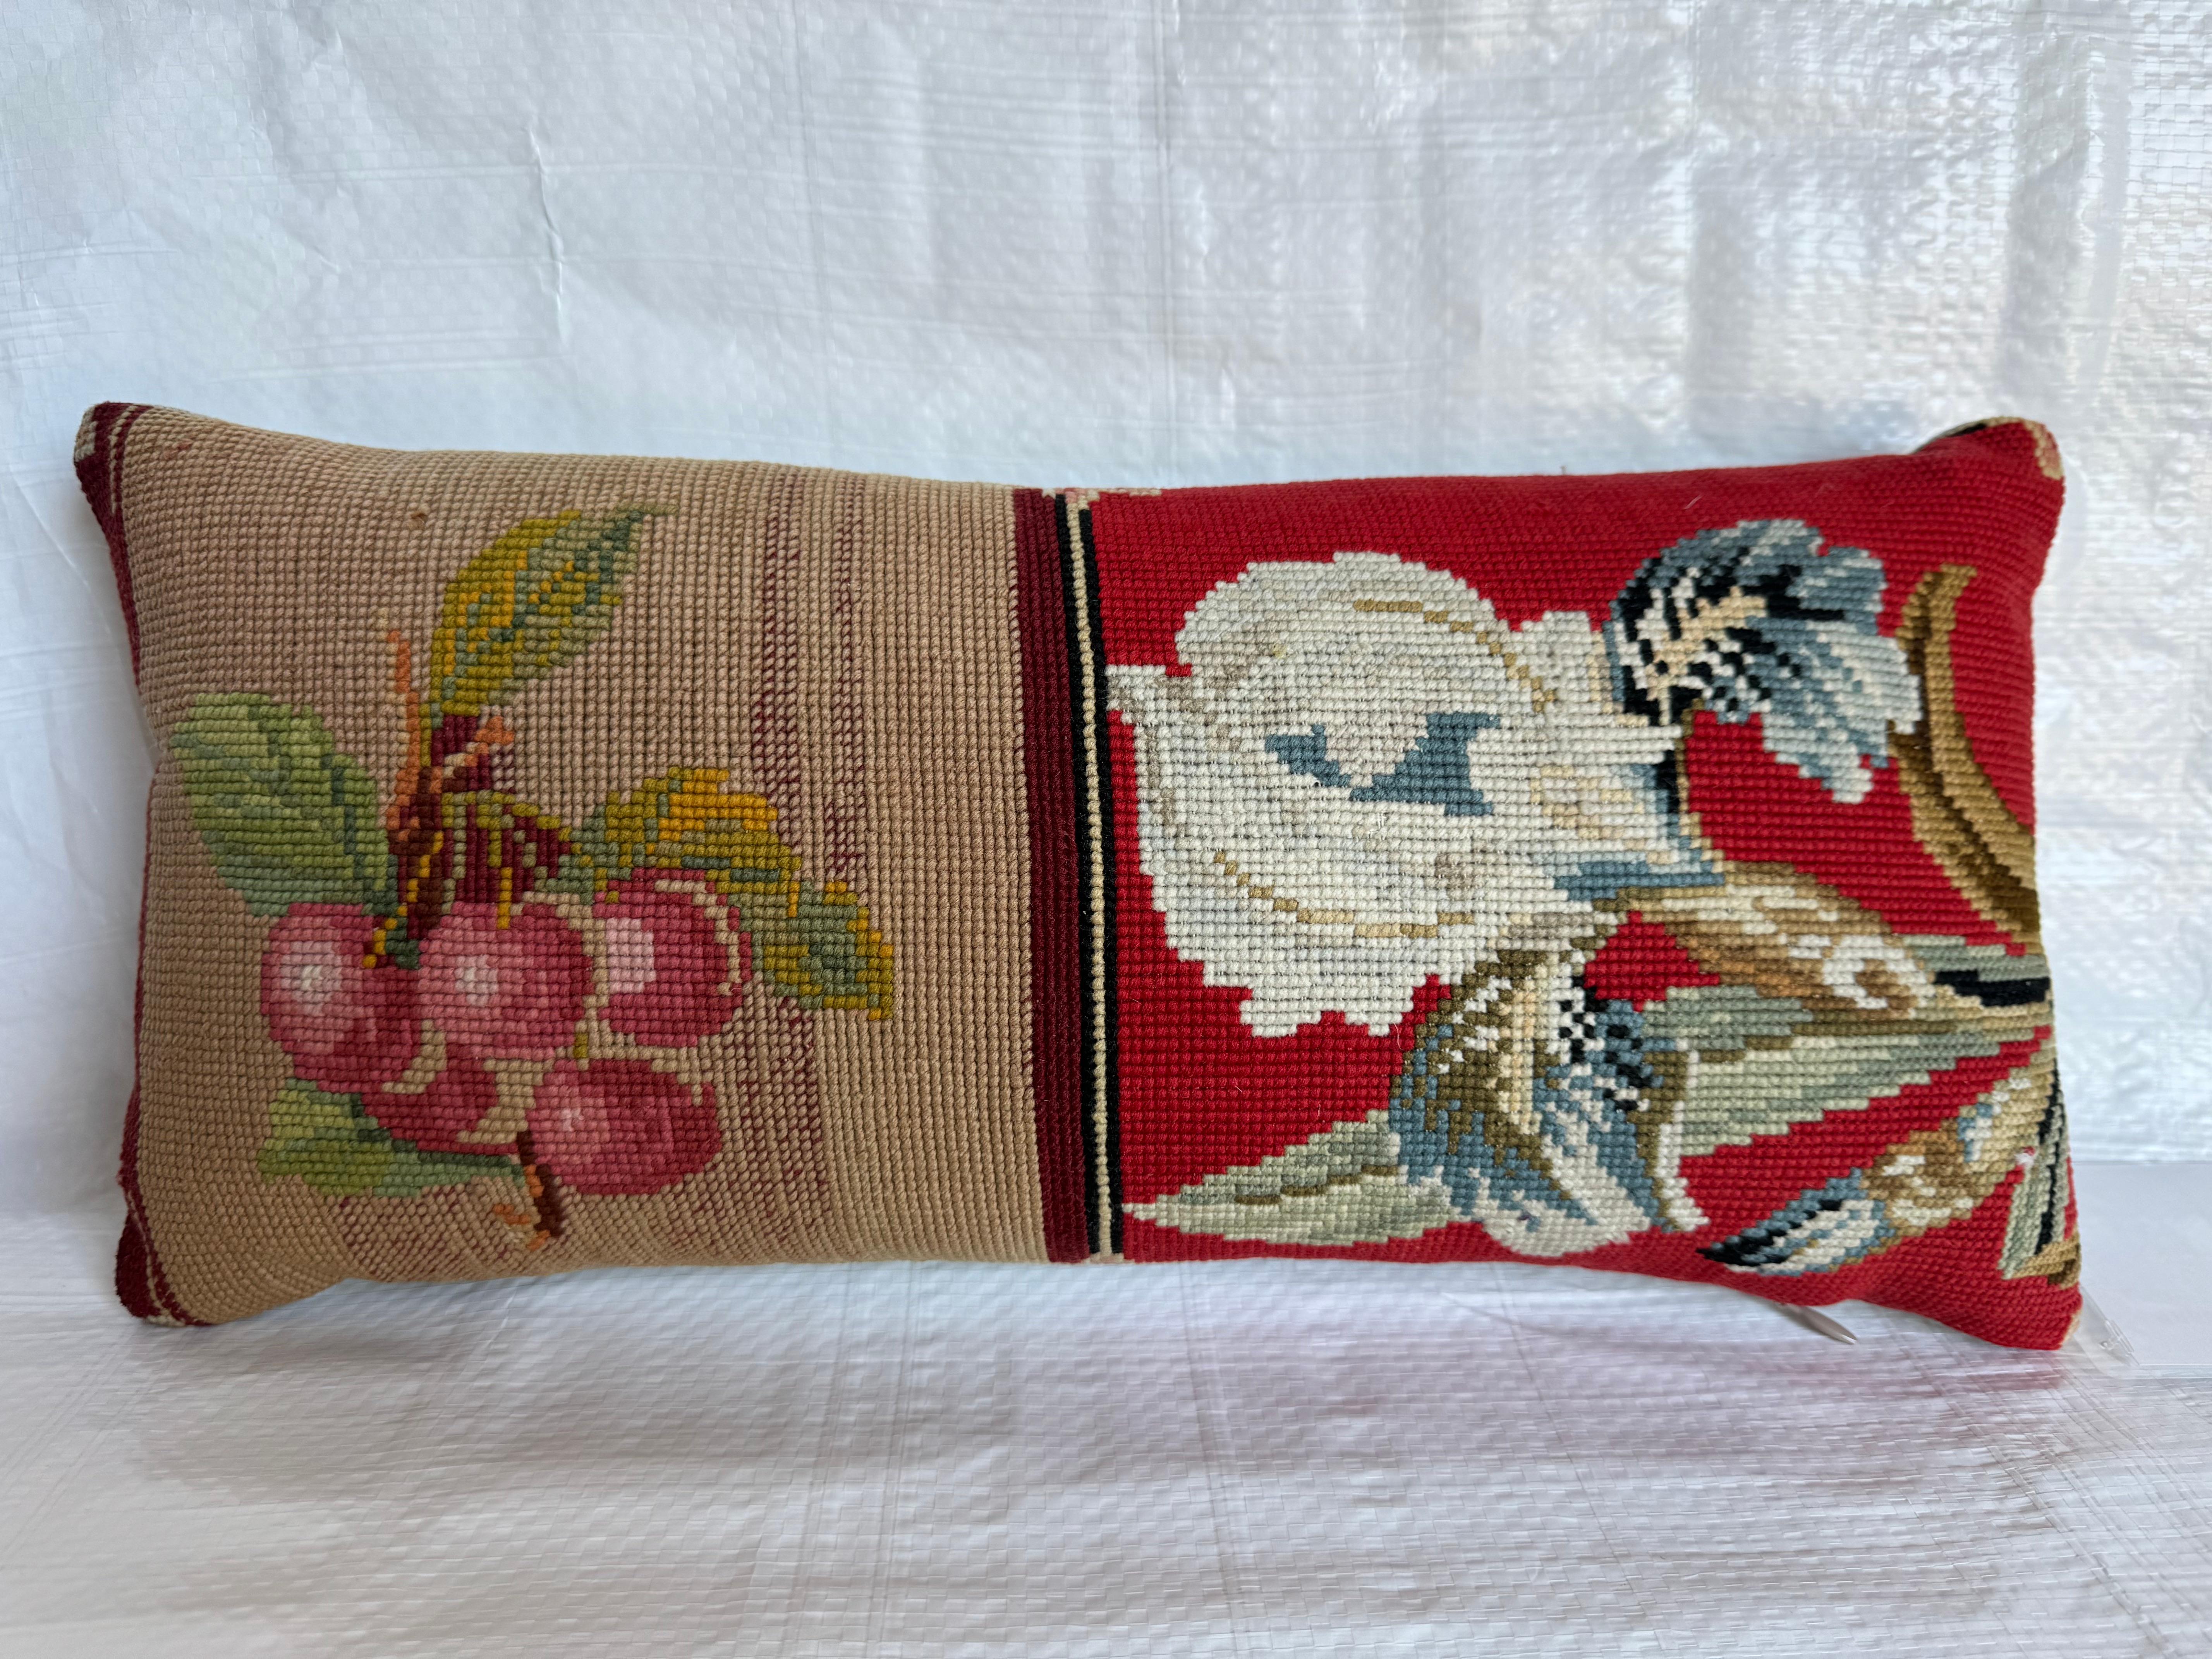 Experience the elegance of 1850 English Needlework with our 16